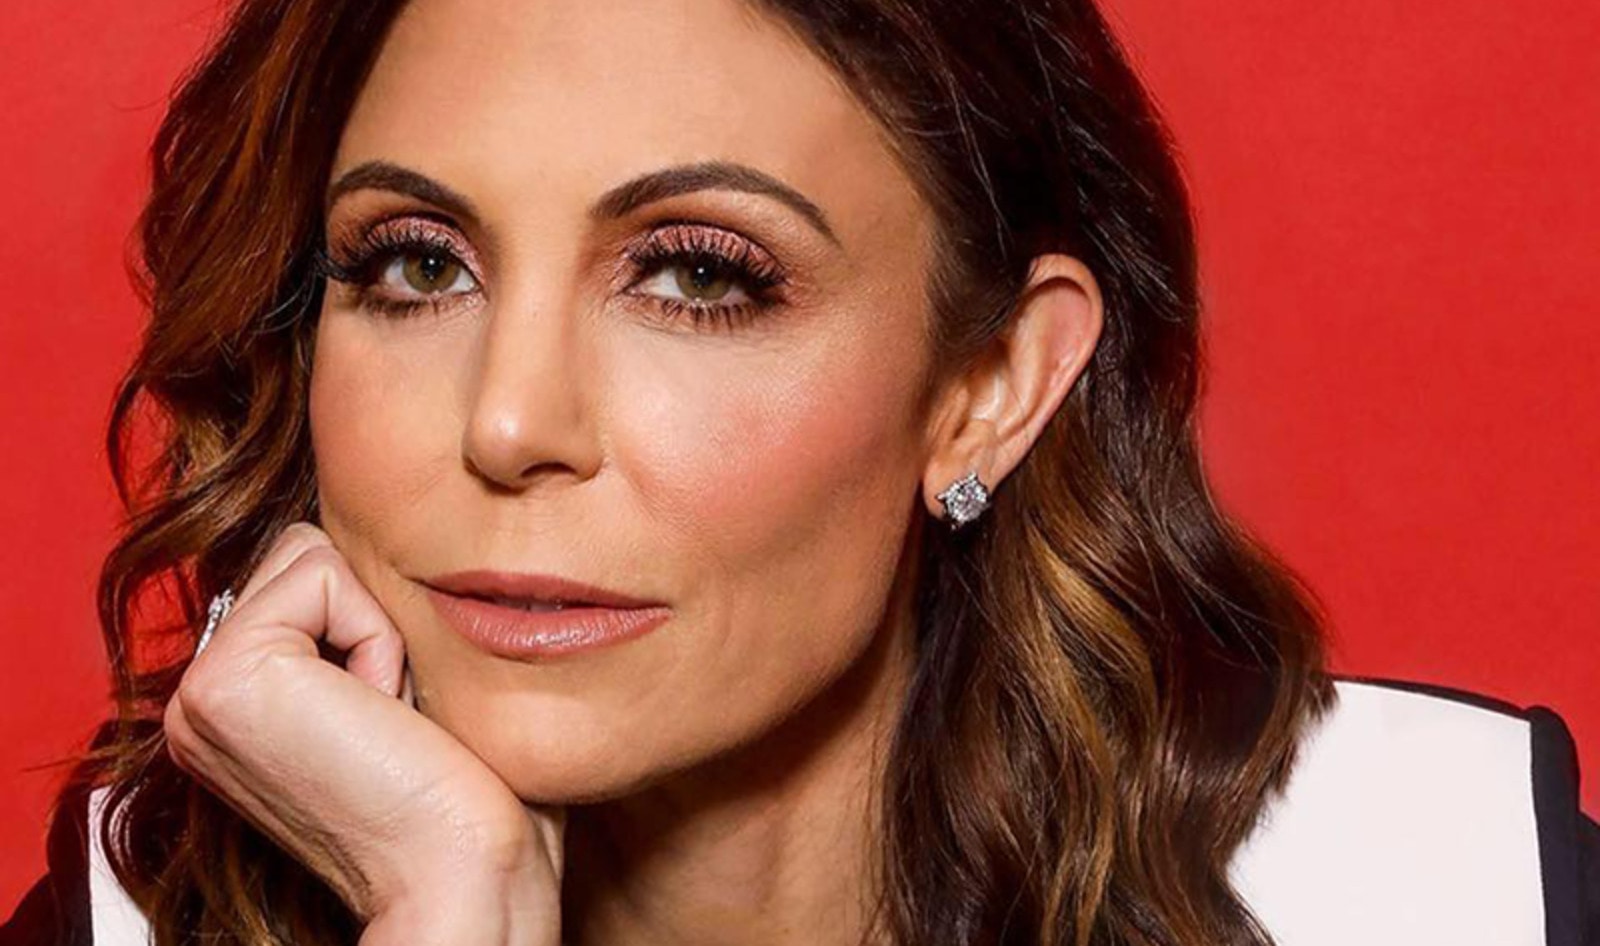 Real Housewife Bethenny Frankel Wants to “Be Buried” in Vegan Dessert Shop